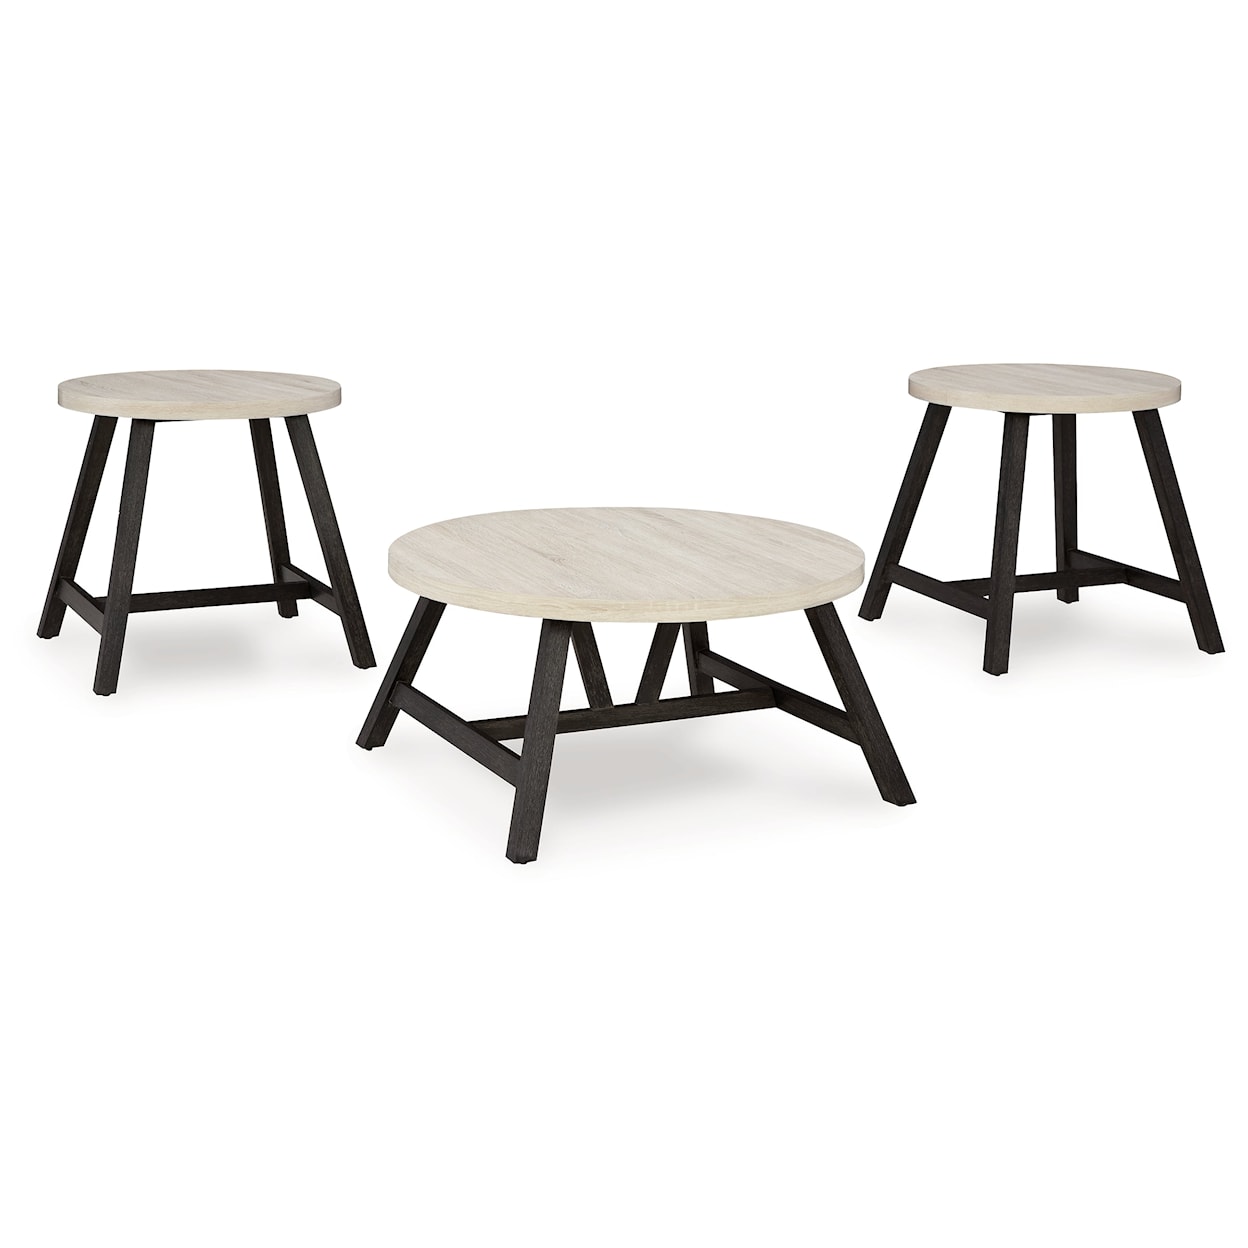 Benchcraft Fladona Occasional Table (Set of 3)